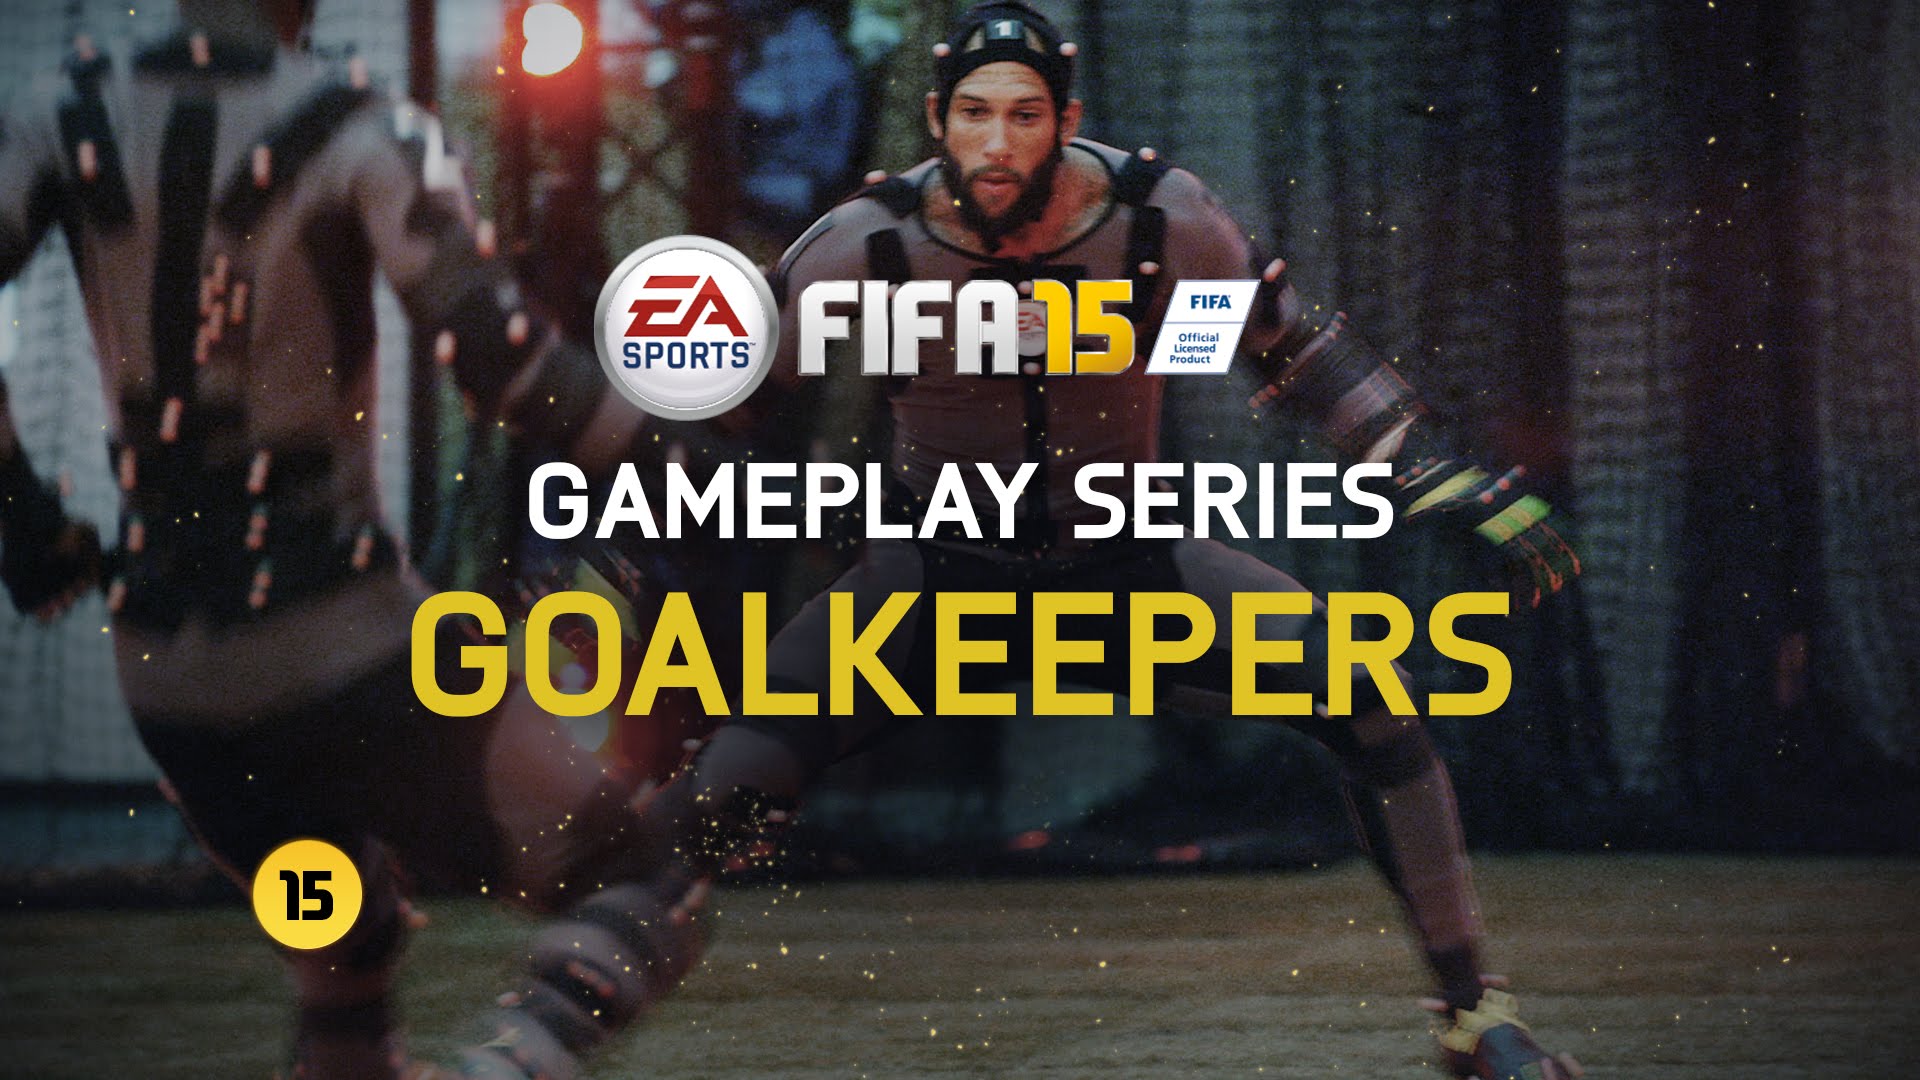 Goalkeepers have been completely rewritten for FIFA 15 with over 50 new save animations, improved AI and a new, realistic player model.